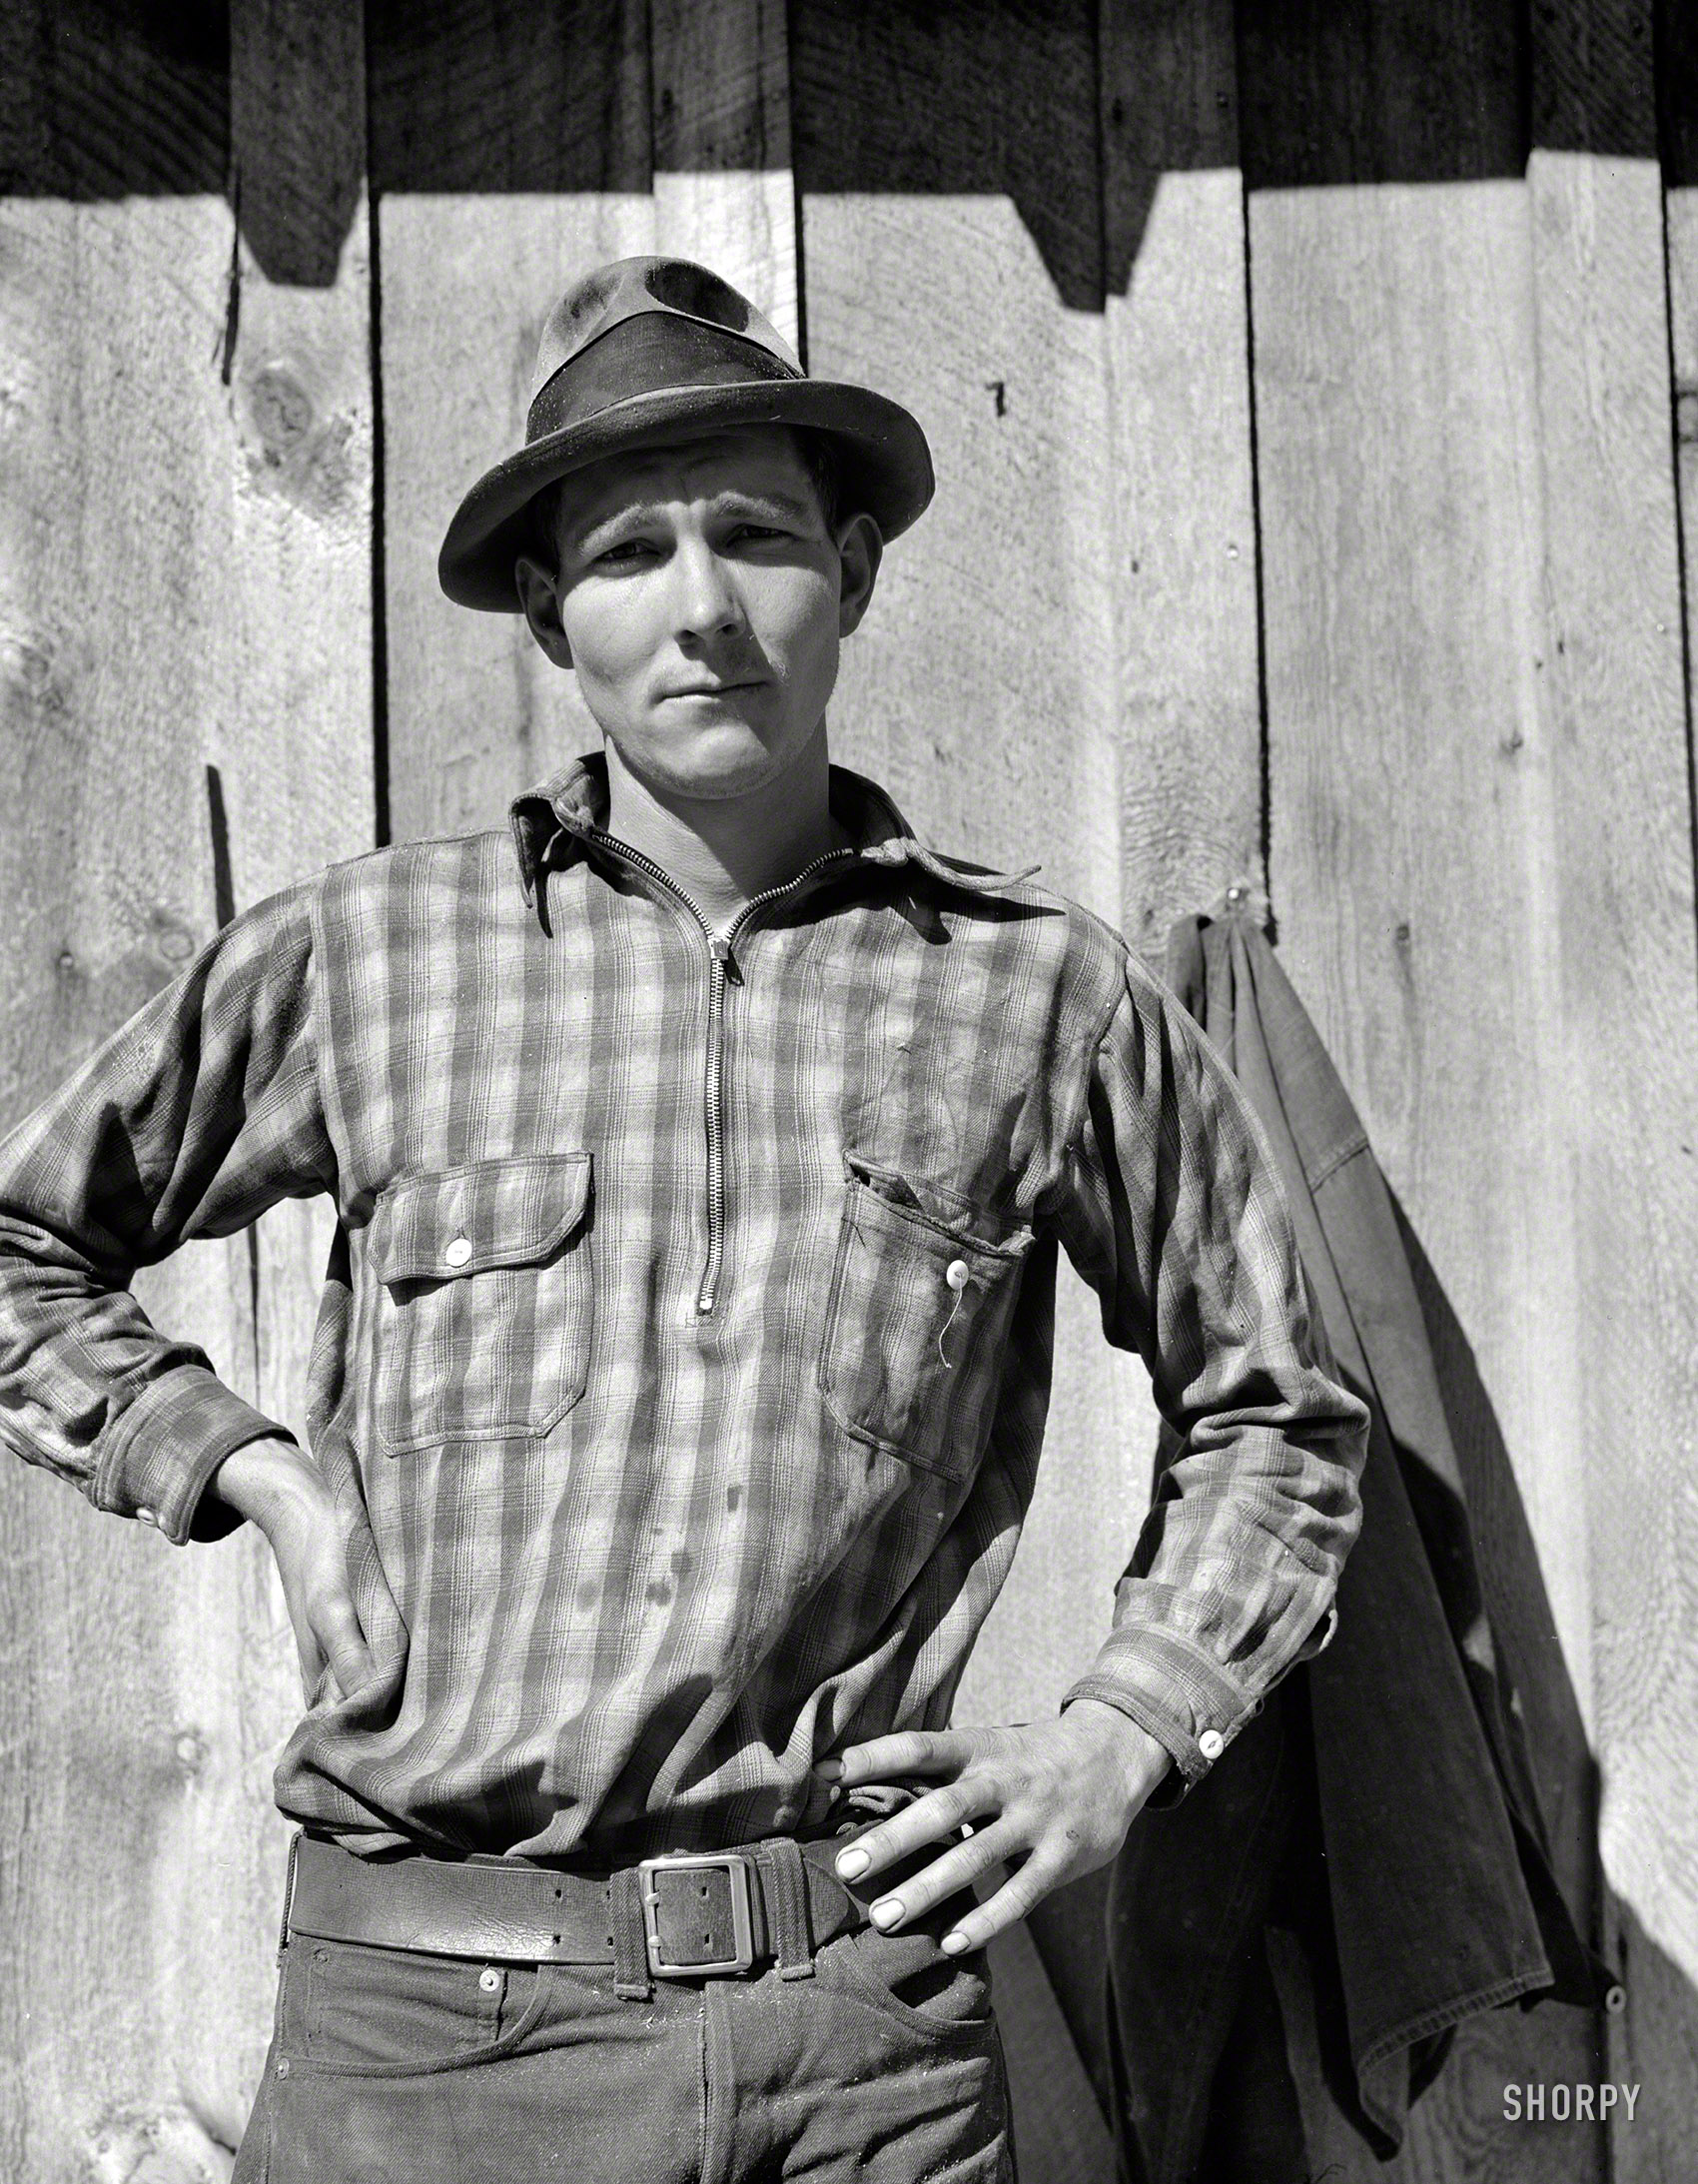 October 1939. "One of 36 members of the Ola self-help sawmill cooperative. Sawmill started with an FSA loan. Gem County, Idaho." Photo by Dorothea Lange for the Farm Security Administration. View full size.